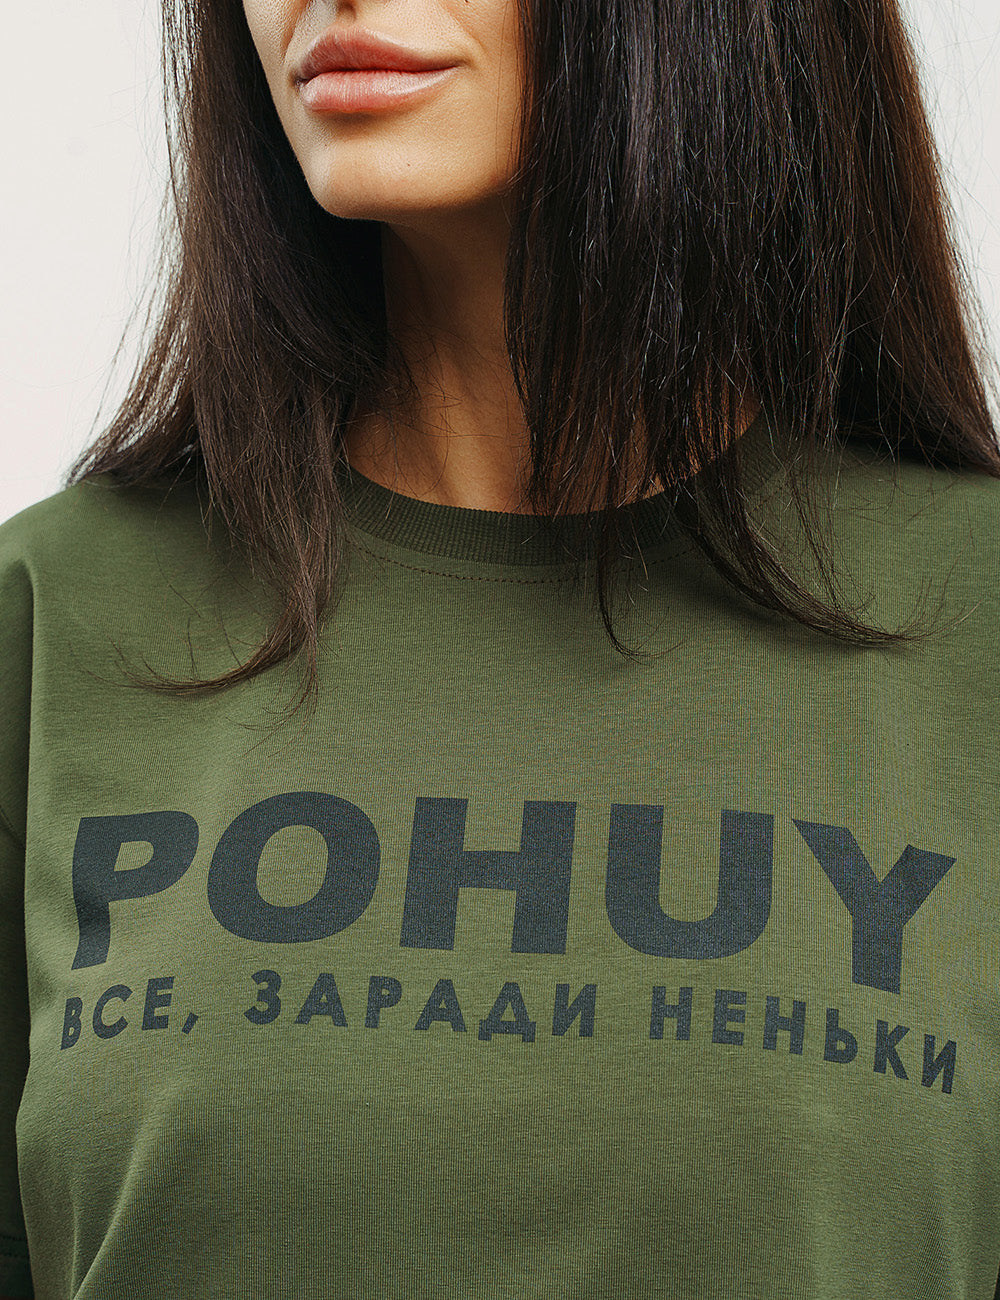 POHUY all for Motherland T-shirt